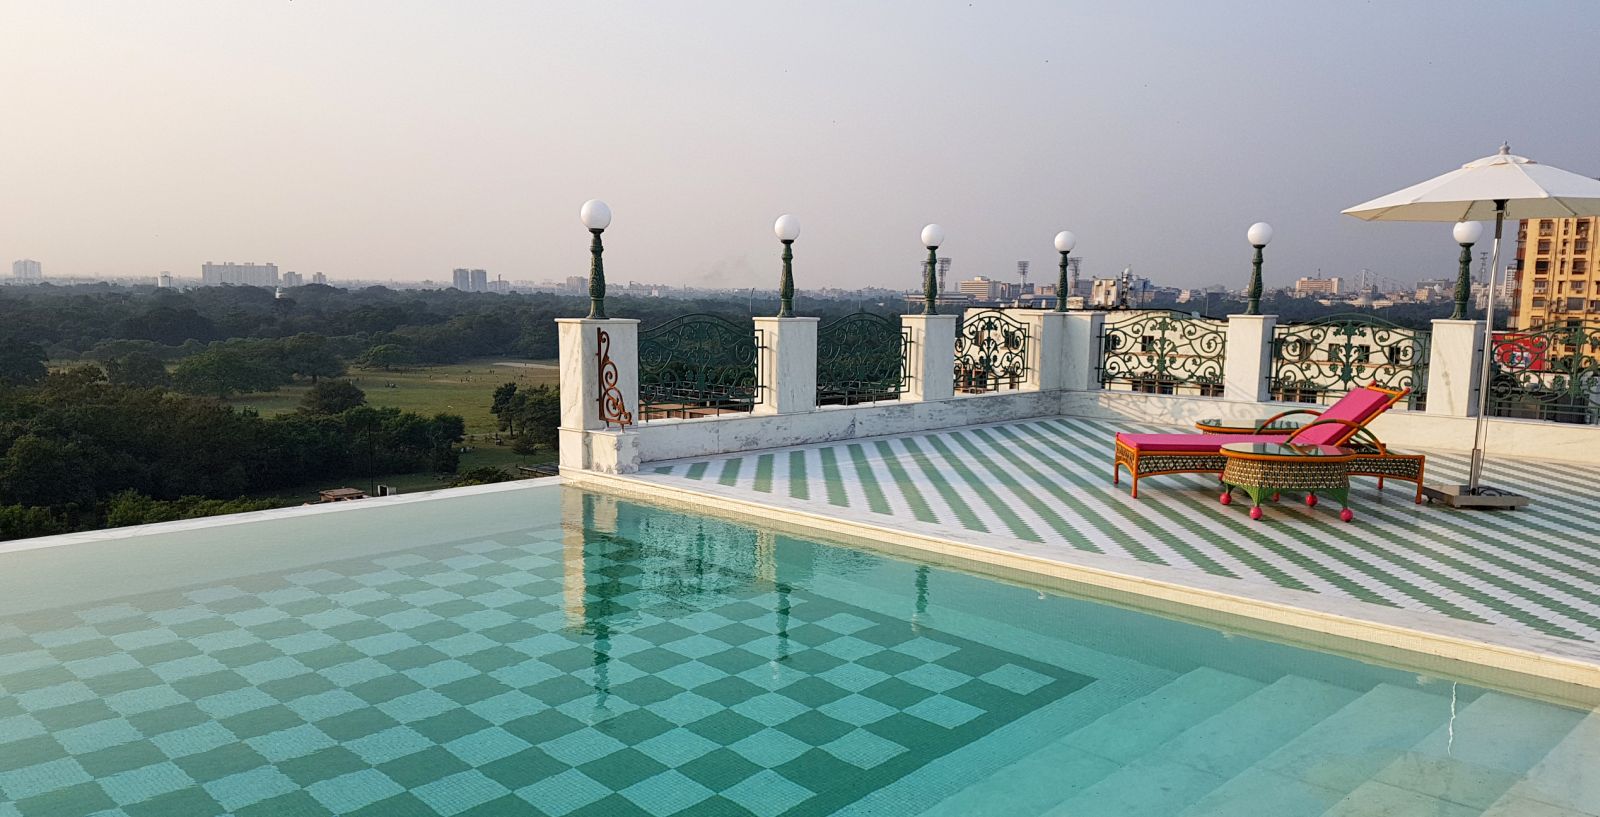 Rooftop pool at the Glenburn Penthouse hotel India